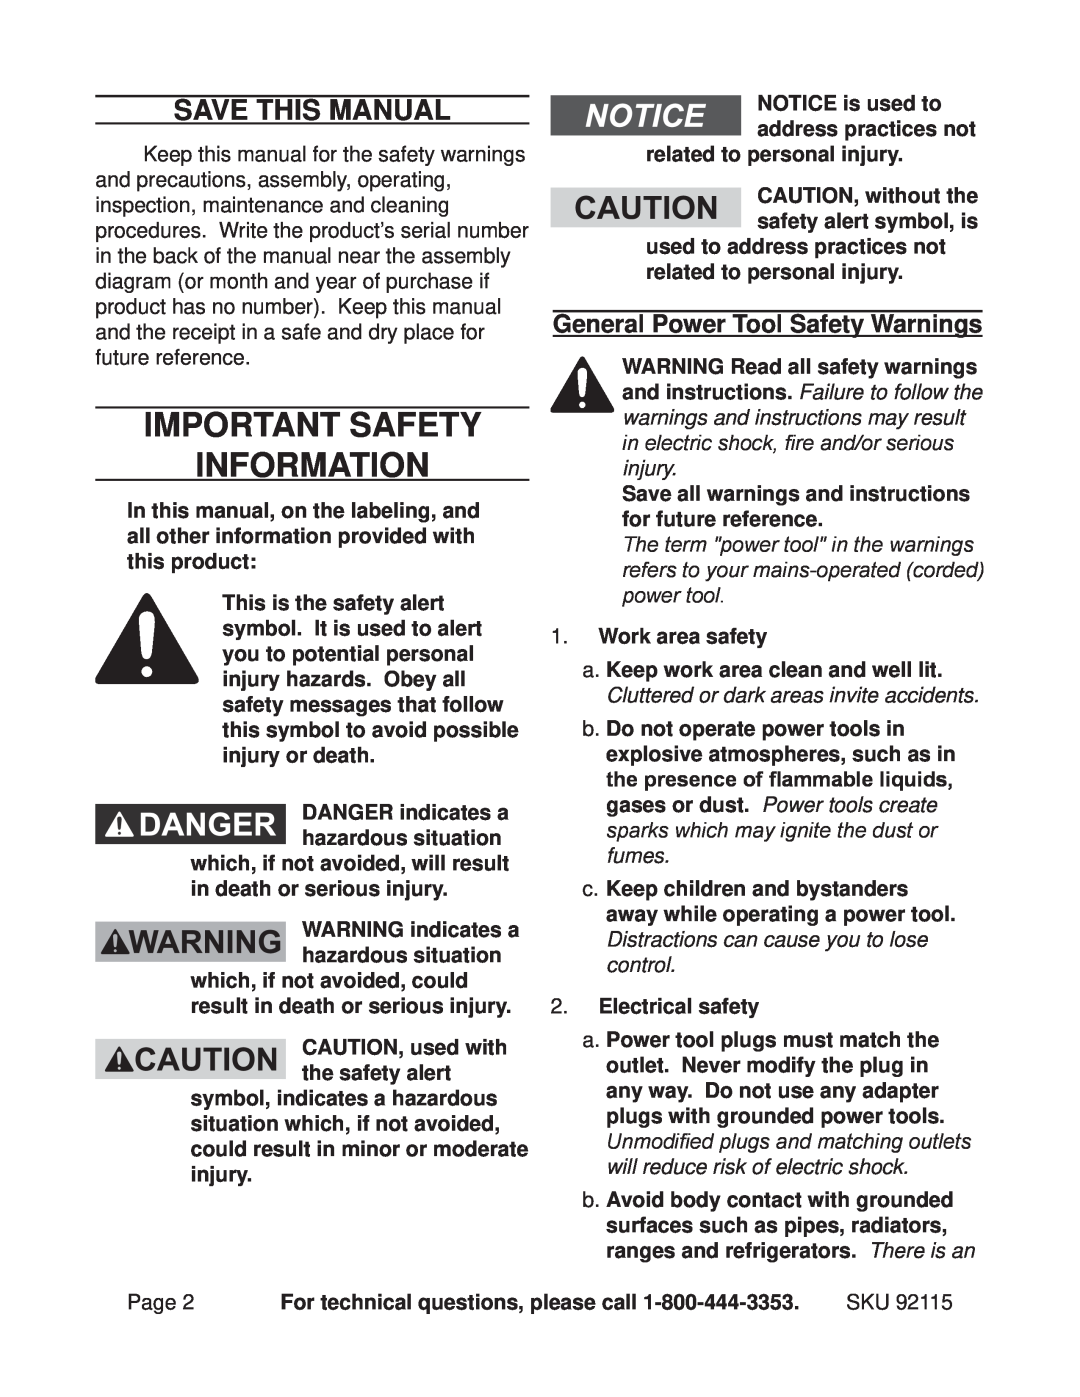 Chicago Electric 92115 Important SAFETY Information, Save This Manual, General Power Tool Safety Warnings 